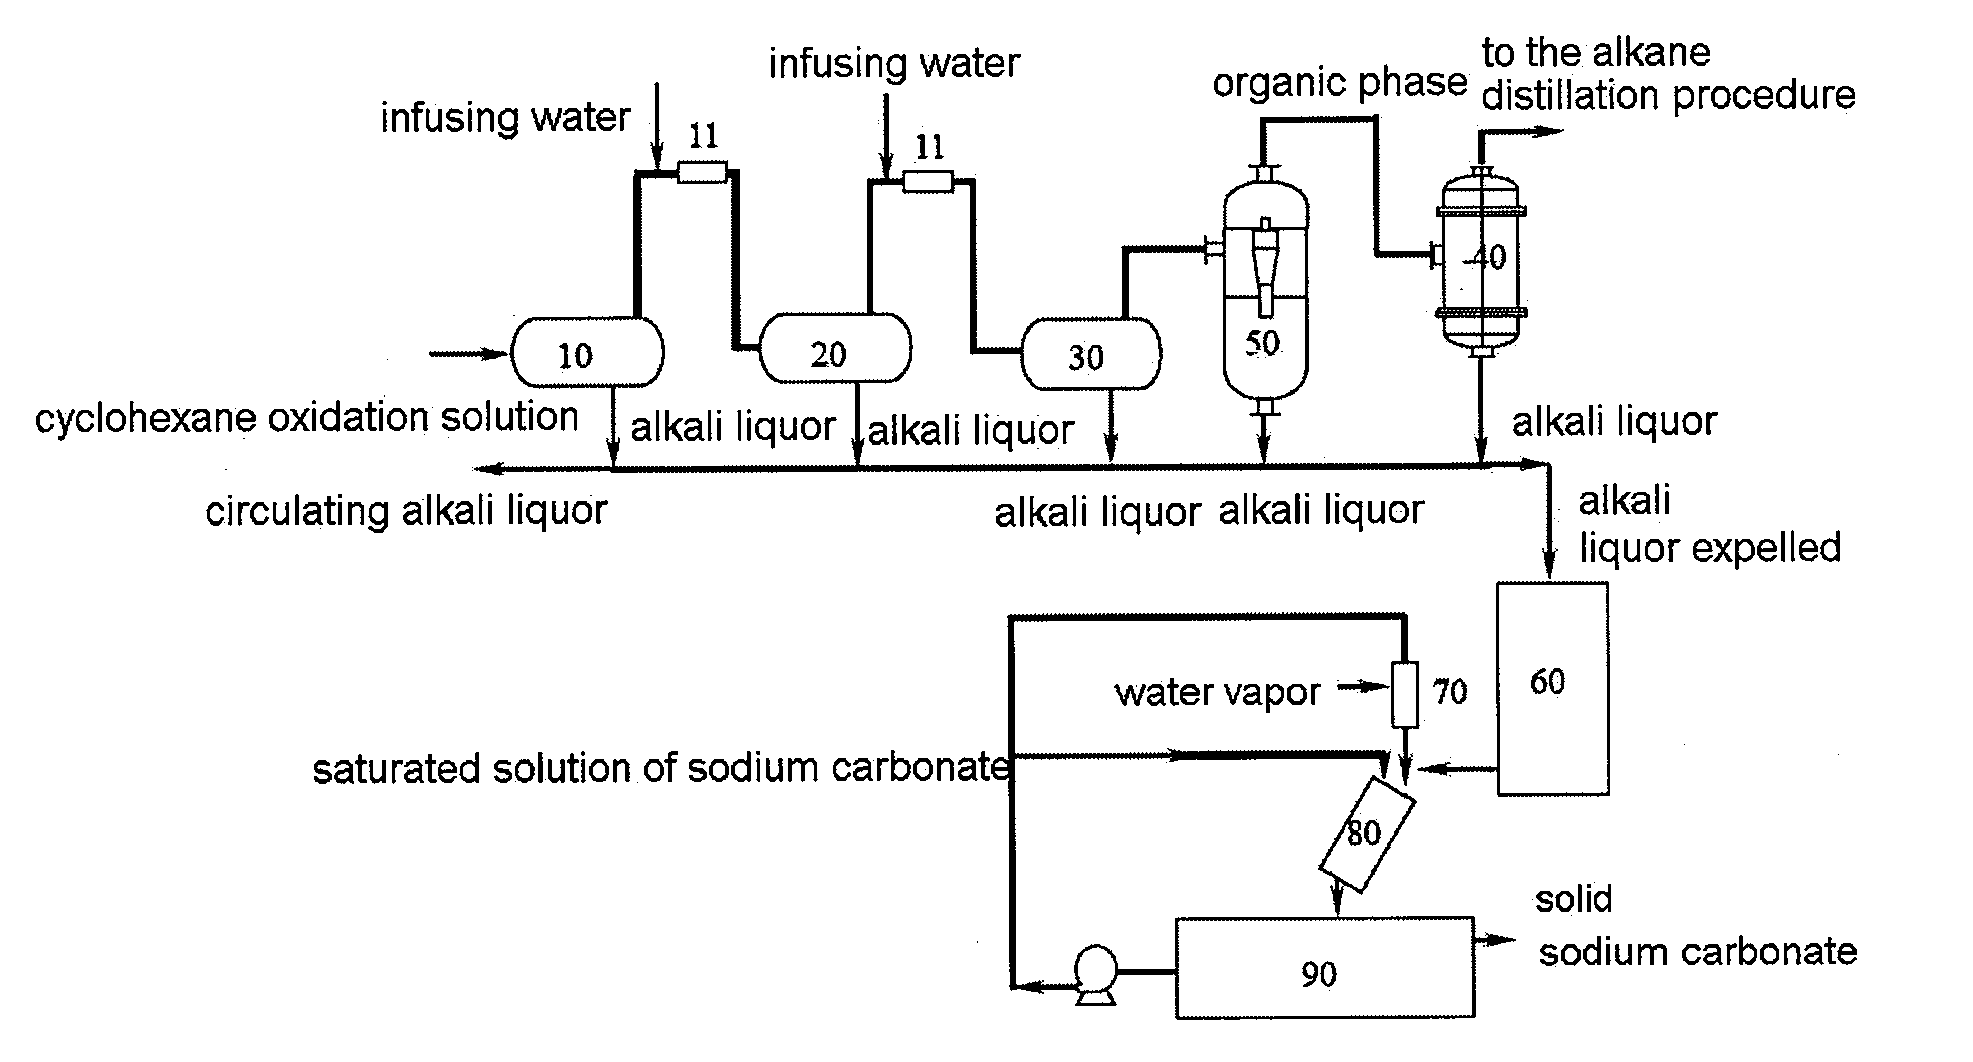 Process and apparatus for separating and recovering waste alkali from cyclohexane oxidation solution